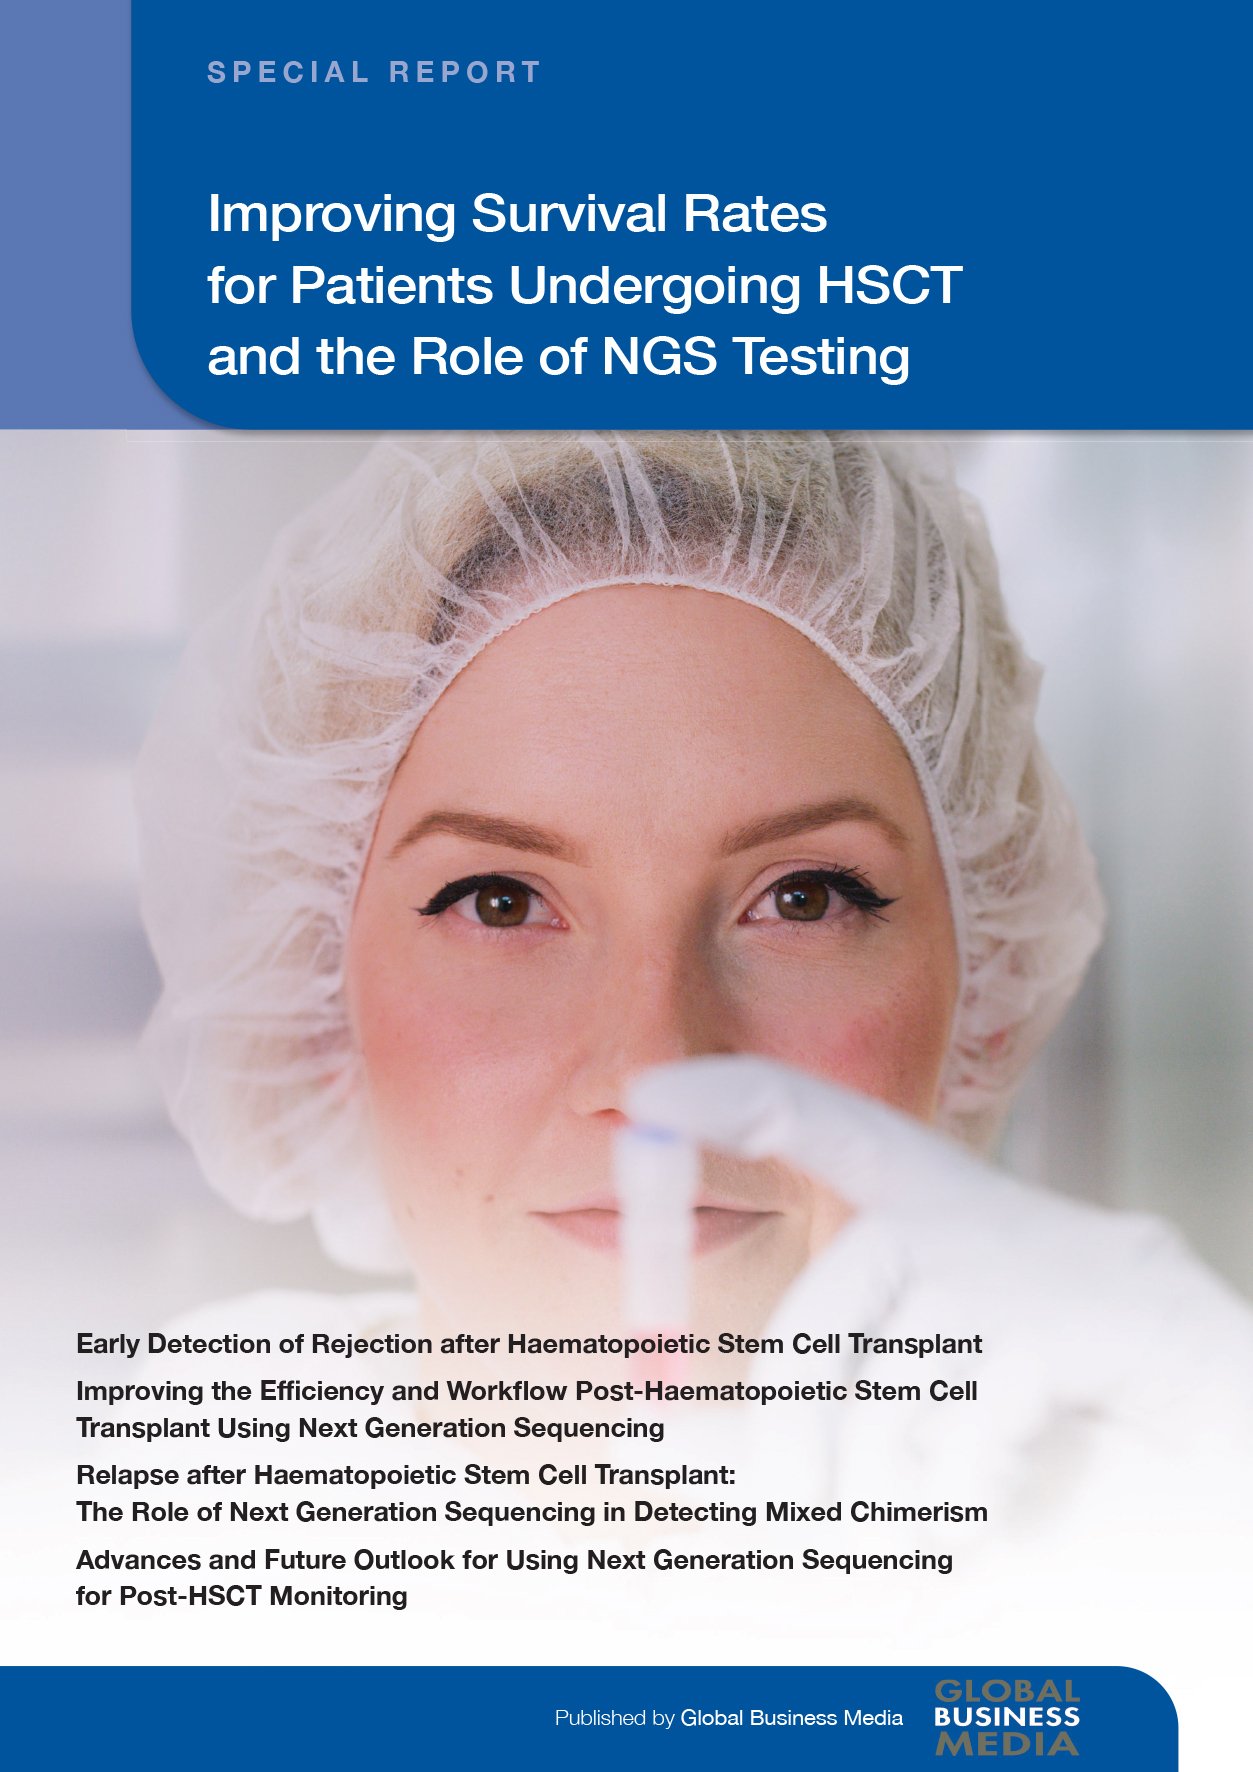 Improving Survival Rates for Patients Undergoing HSCT and the Role of NGS Testing